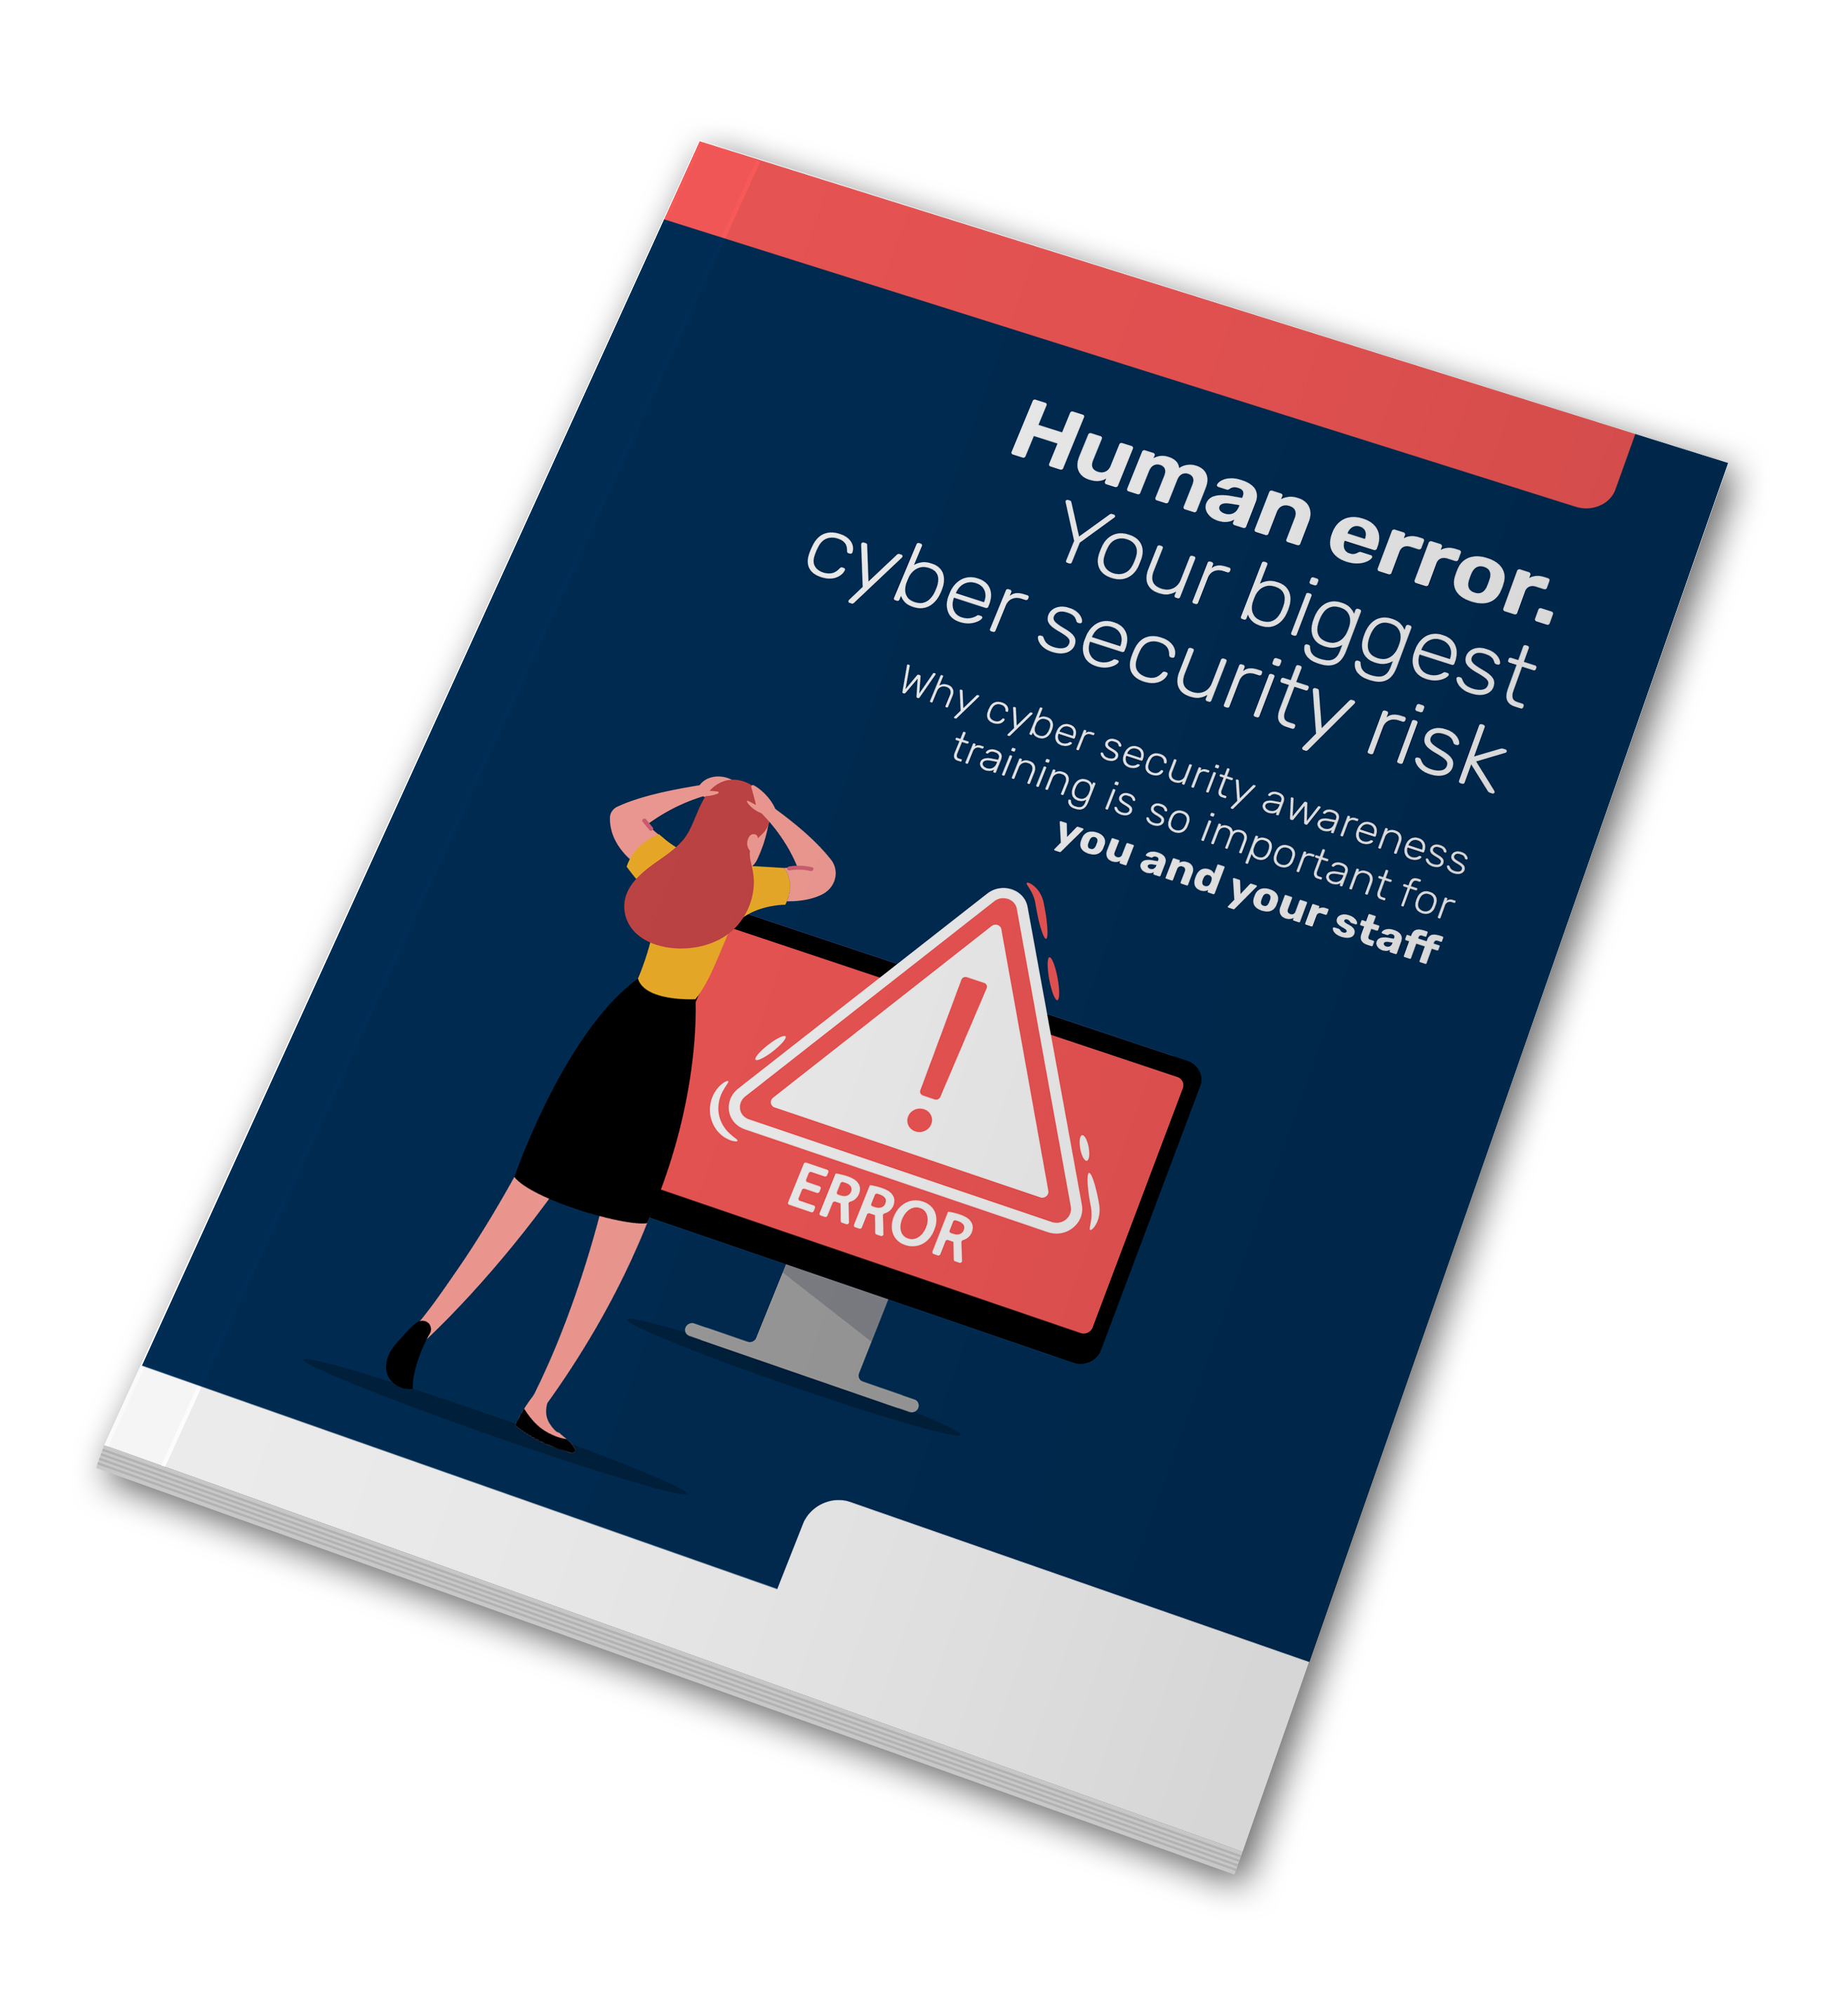 Human error - Your biggest cyber security risk